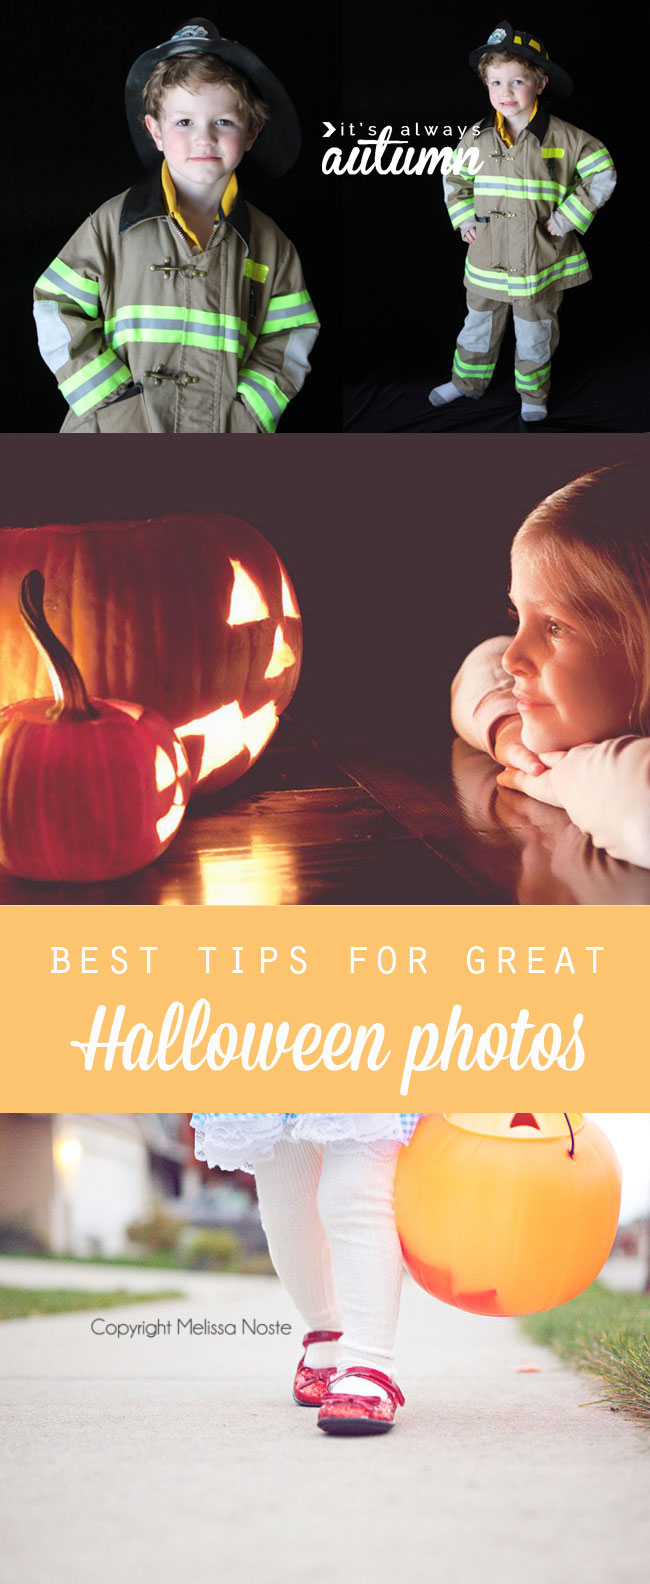 Halloween photos: boy dressed as firefighter; girl looking at jack o lantern; baby girl in ruby slippers